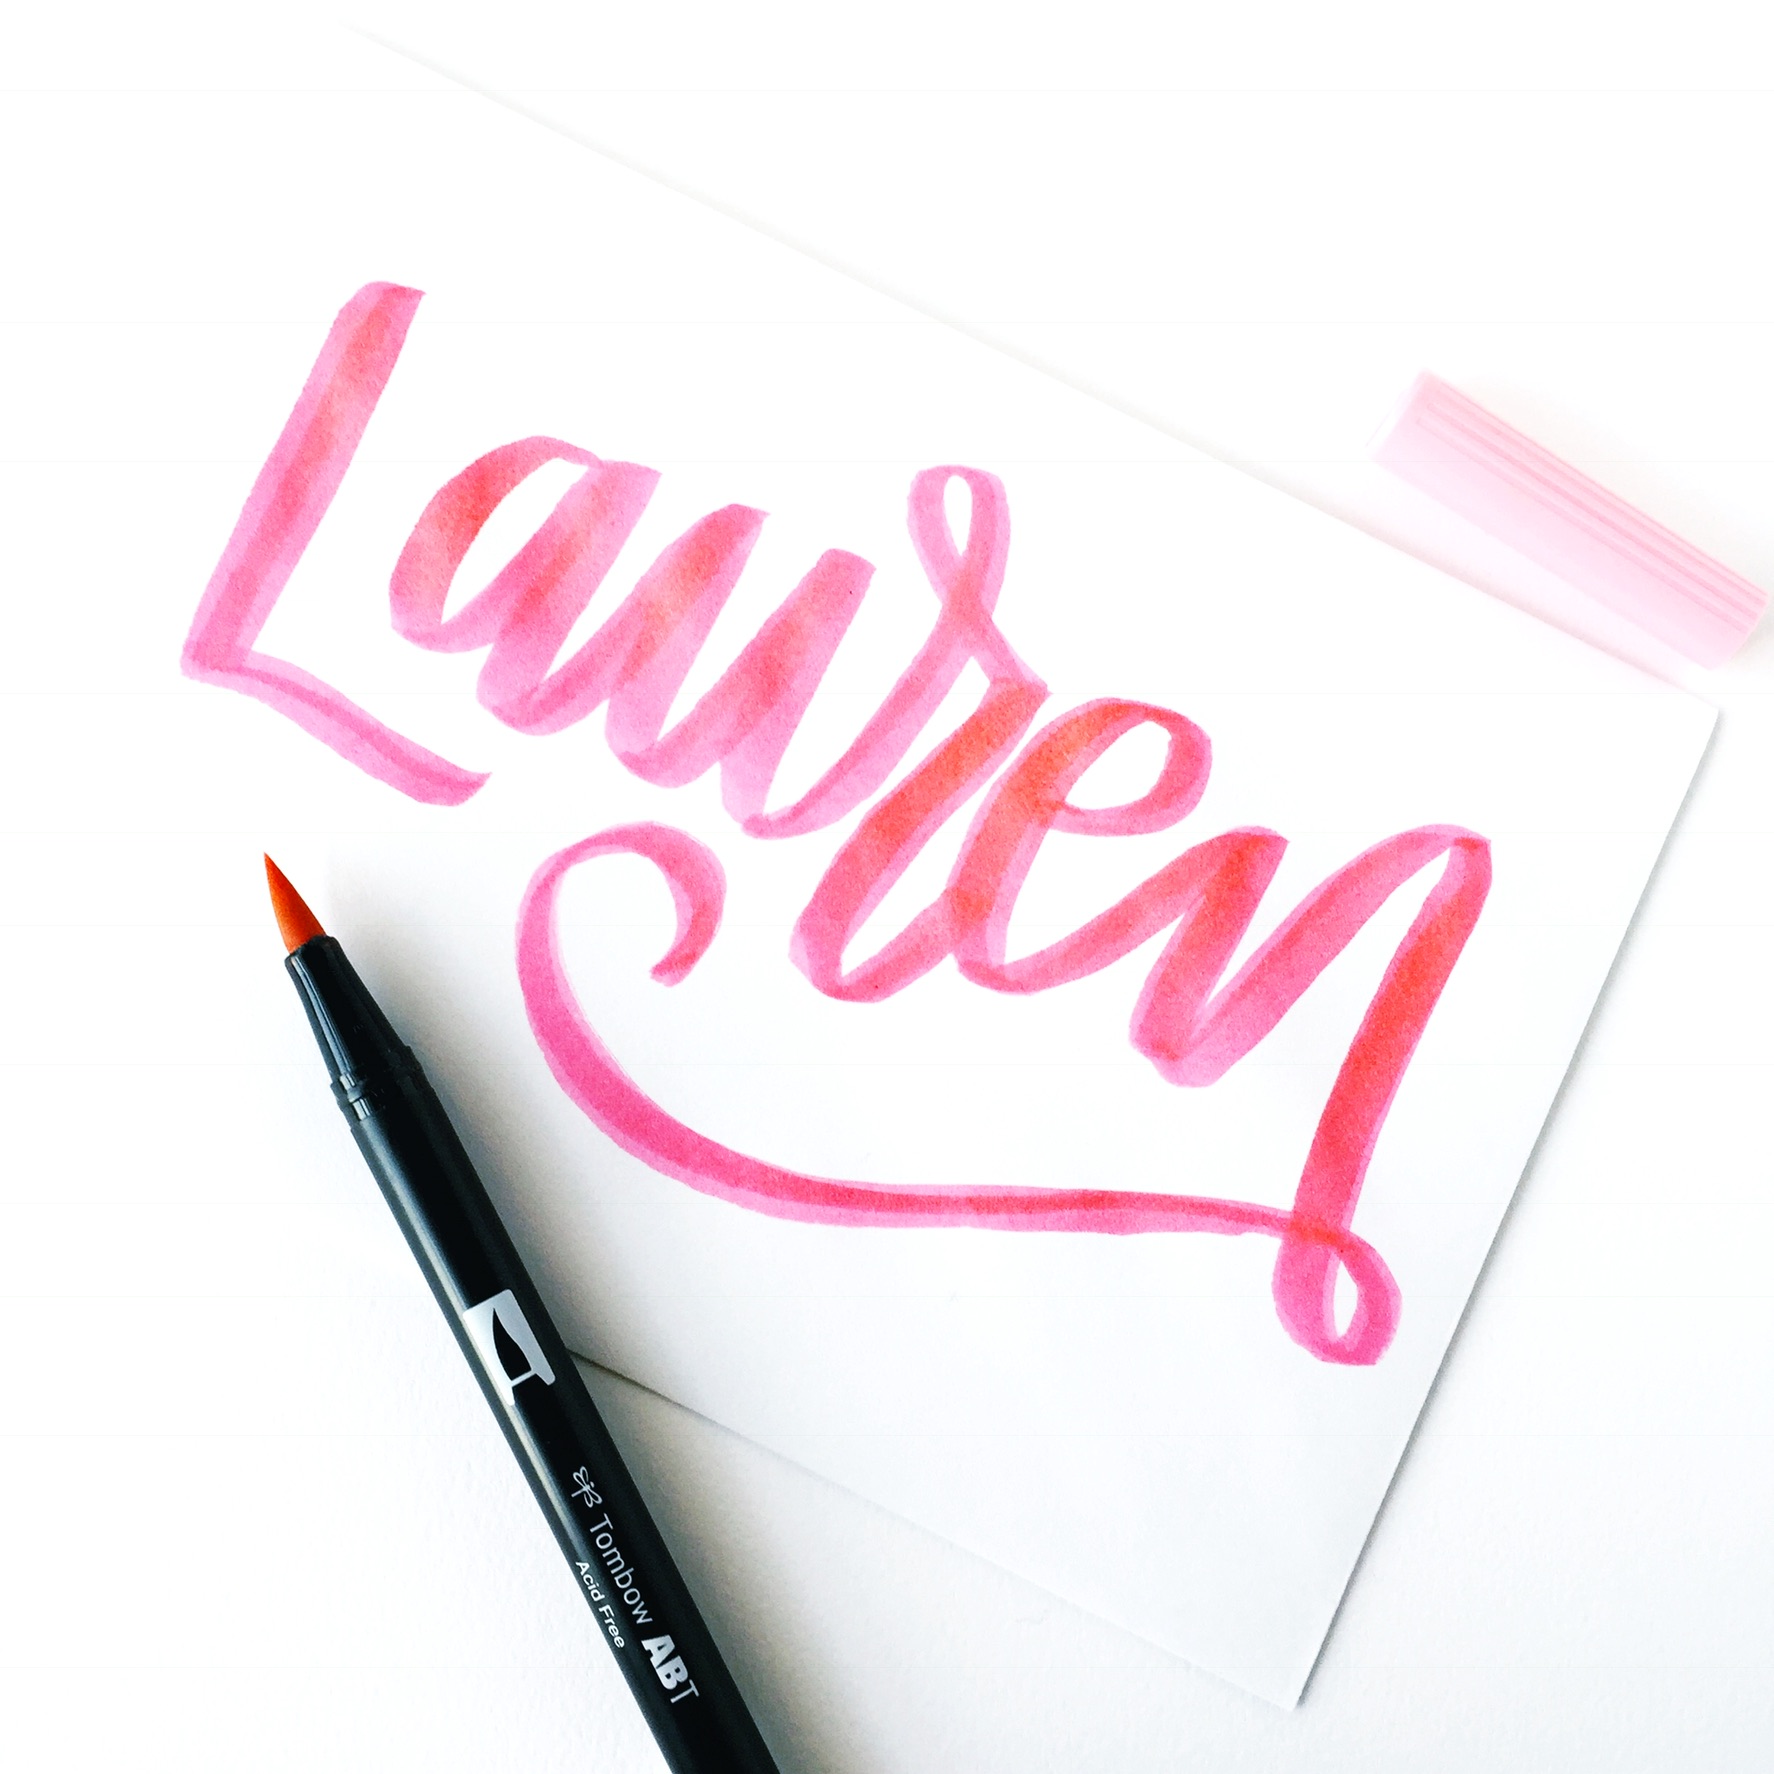 Use @TombowUSA products to create fun lettering projects inspired by dragonflies. @Renmadecalligraphy gives you lettering tips and tricks in this fun step-by-step tutorial that you can make your own!